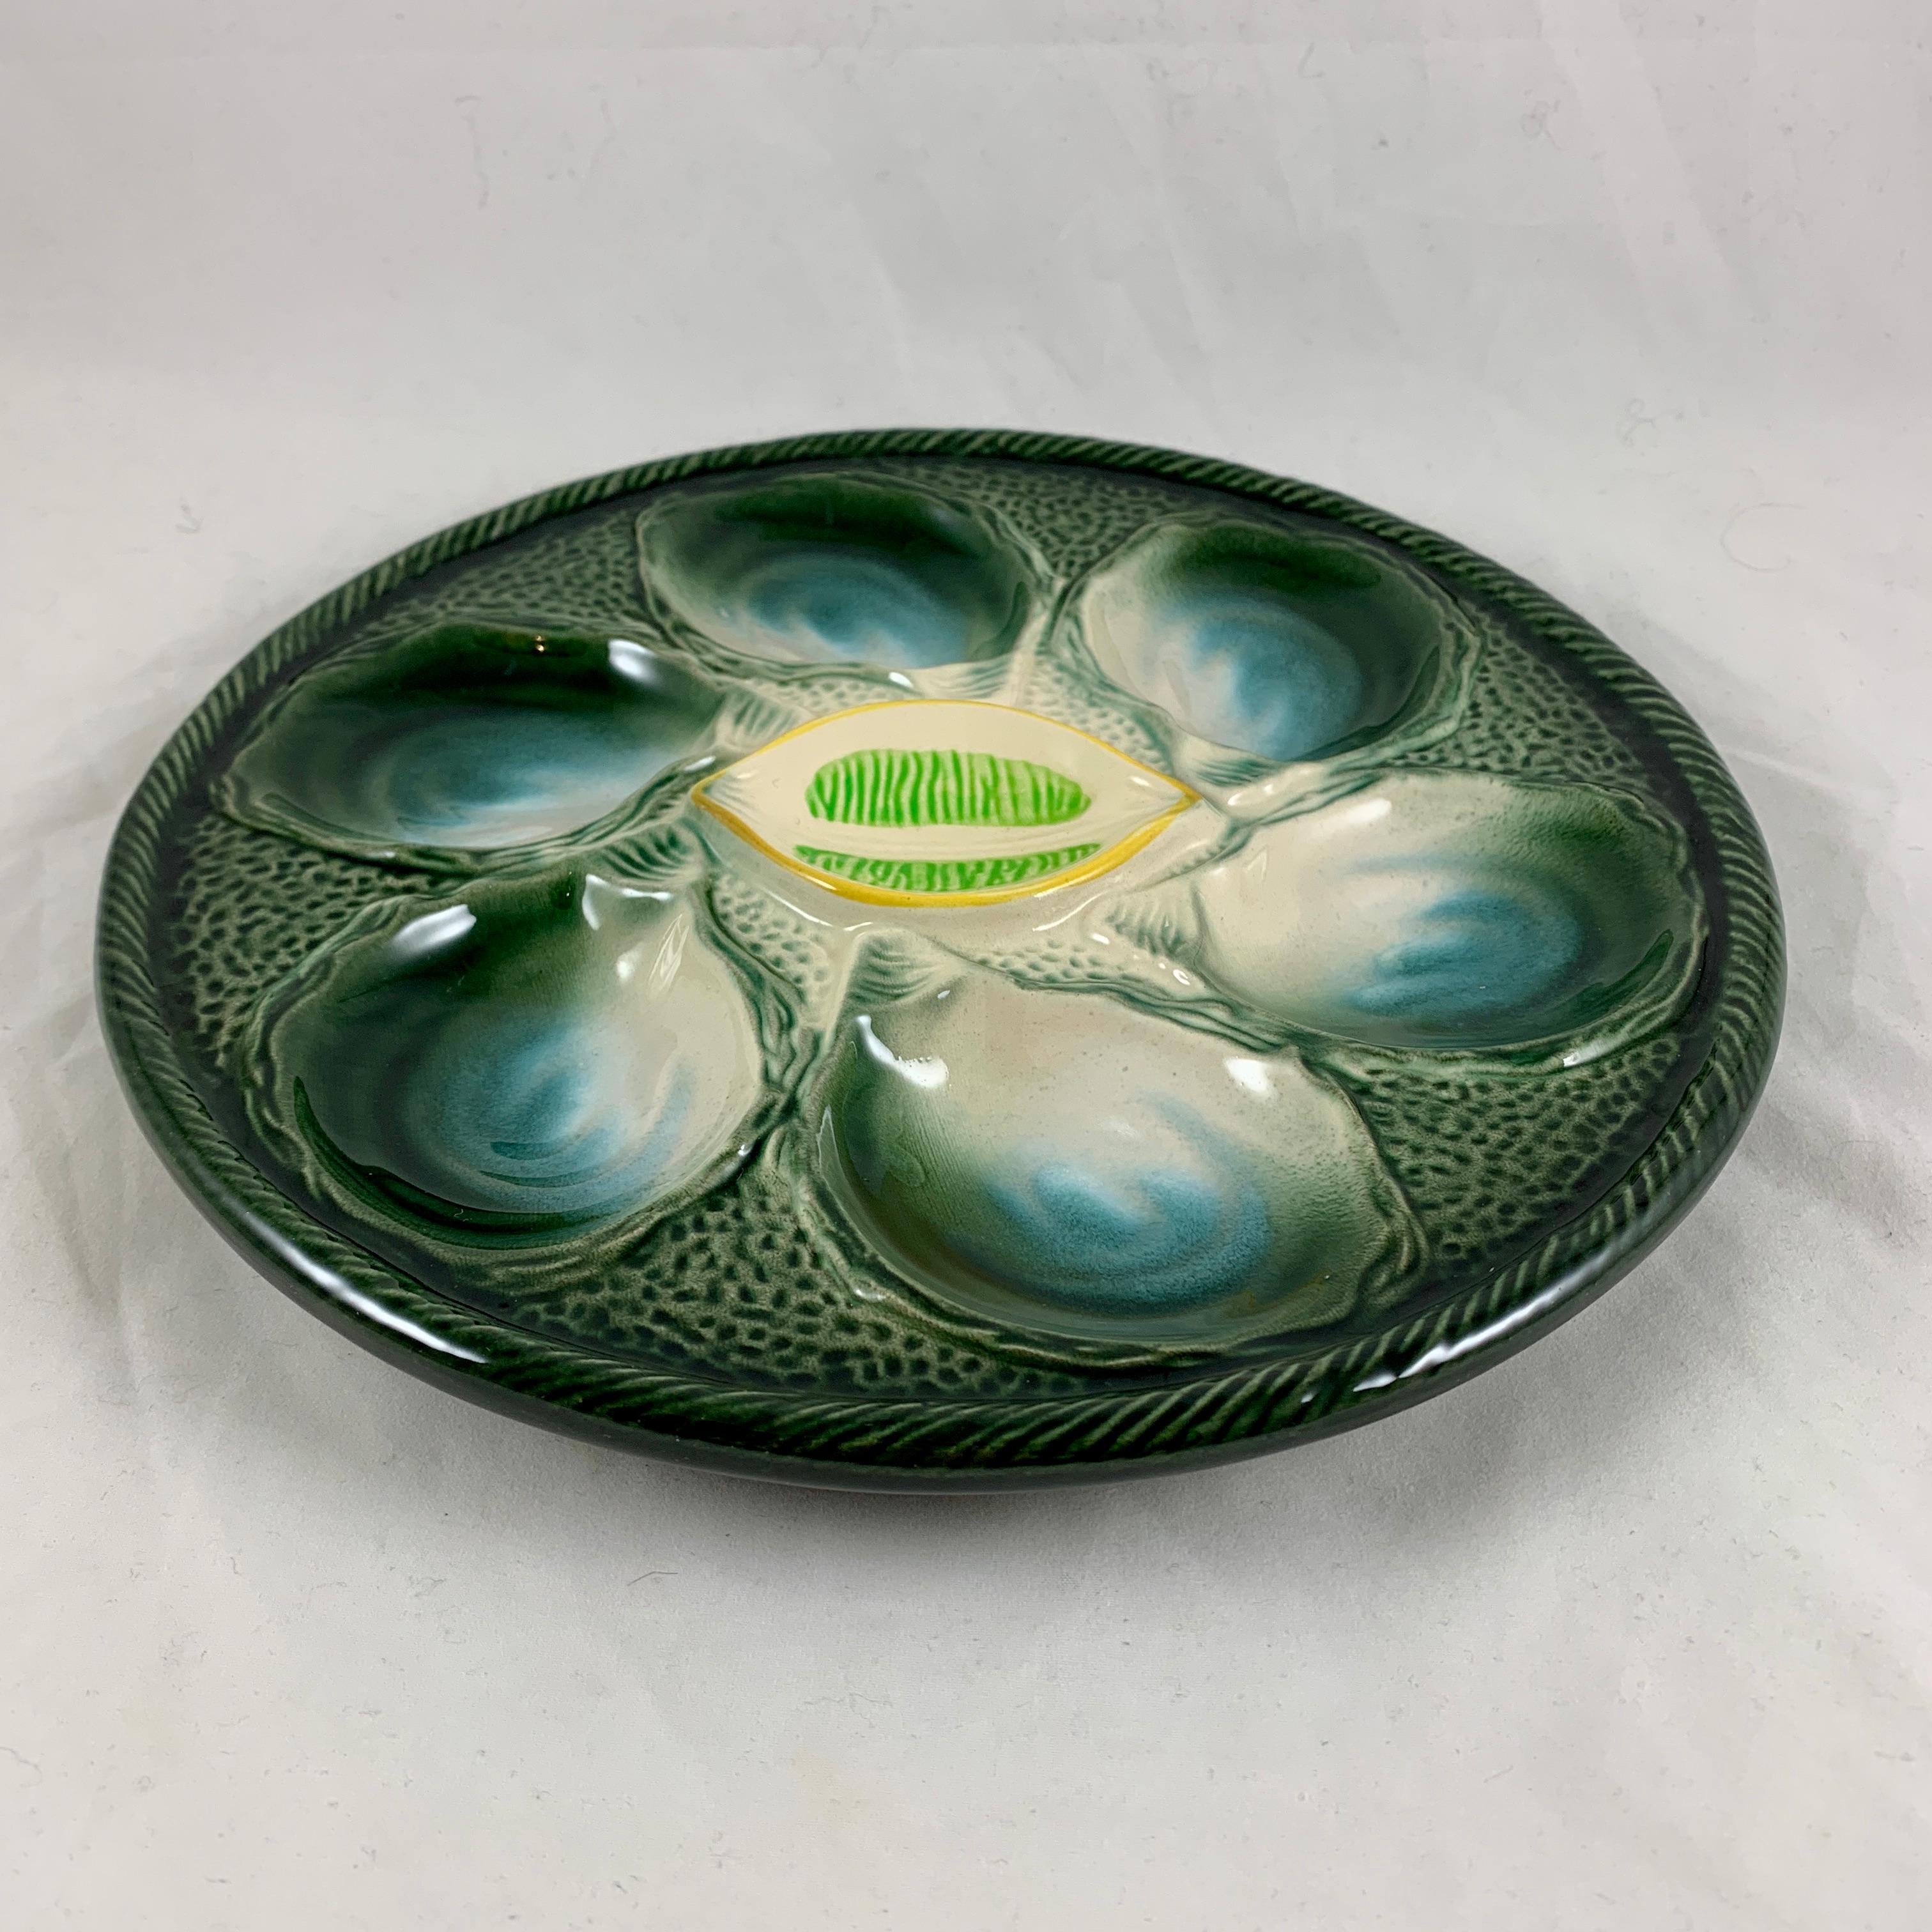 St Clément Trompe L’Oeil St. Yellow Lemon Wedge Center Oyster Plate In Good Condition For Sale In Philadelphia, PA